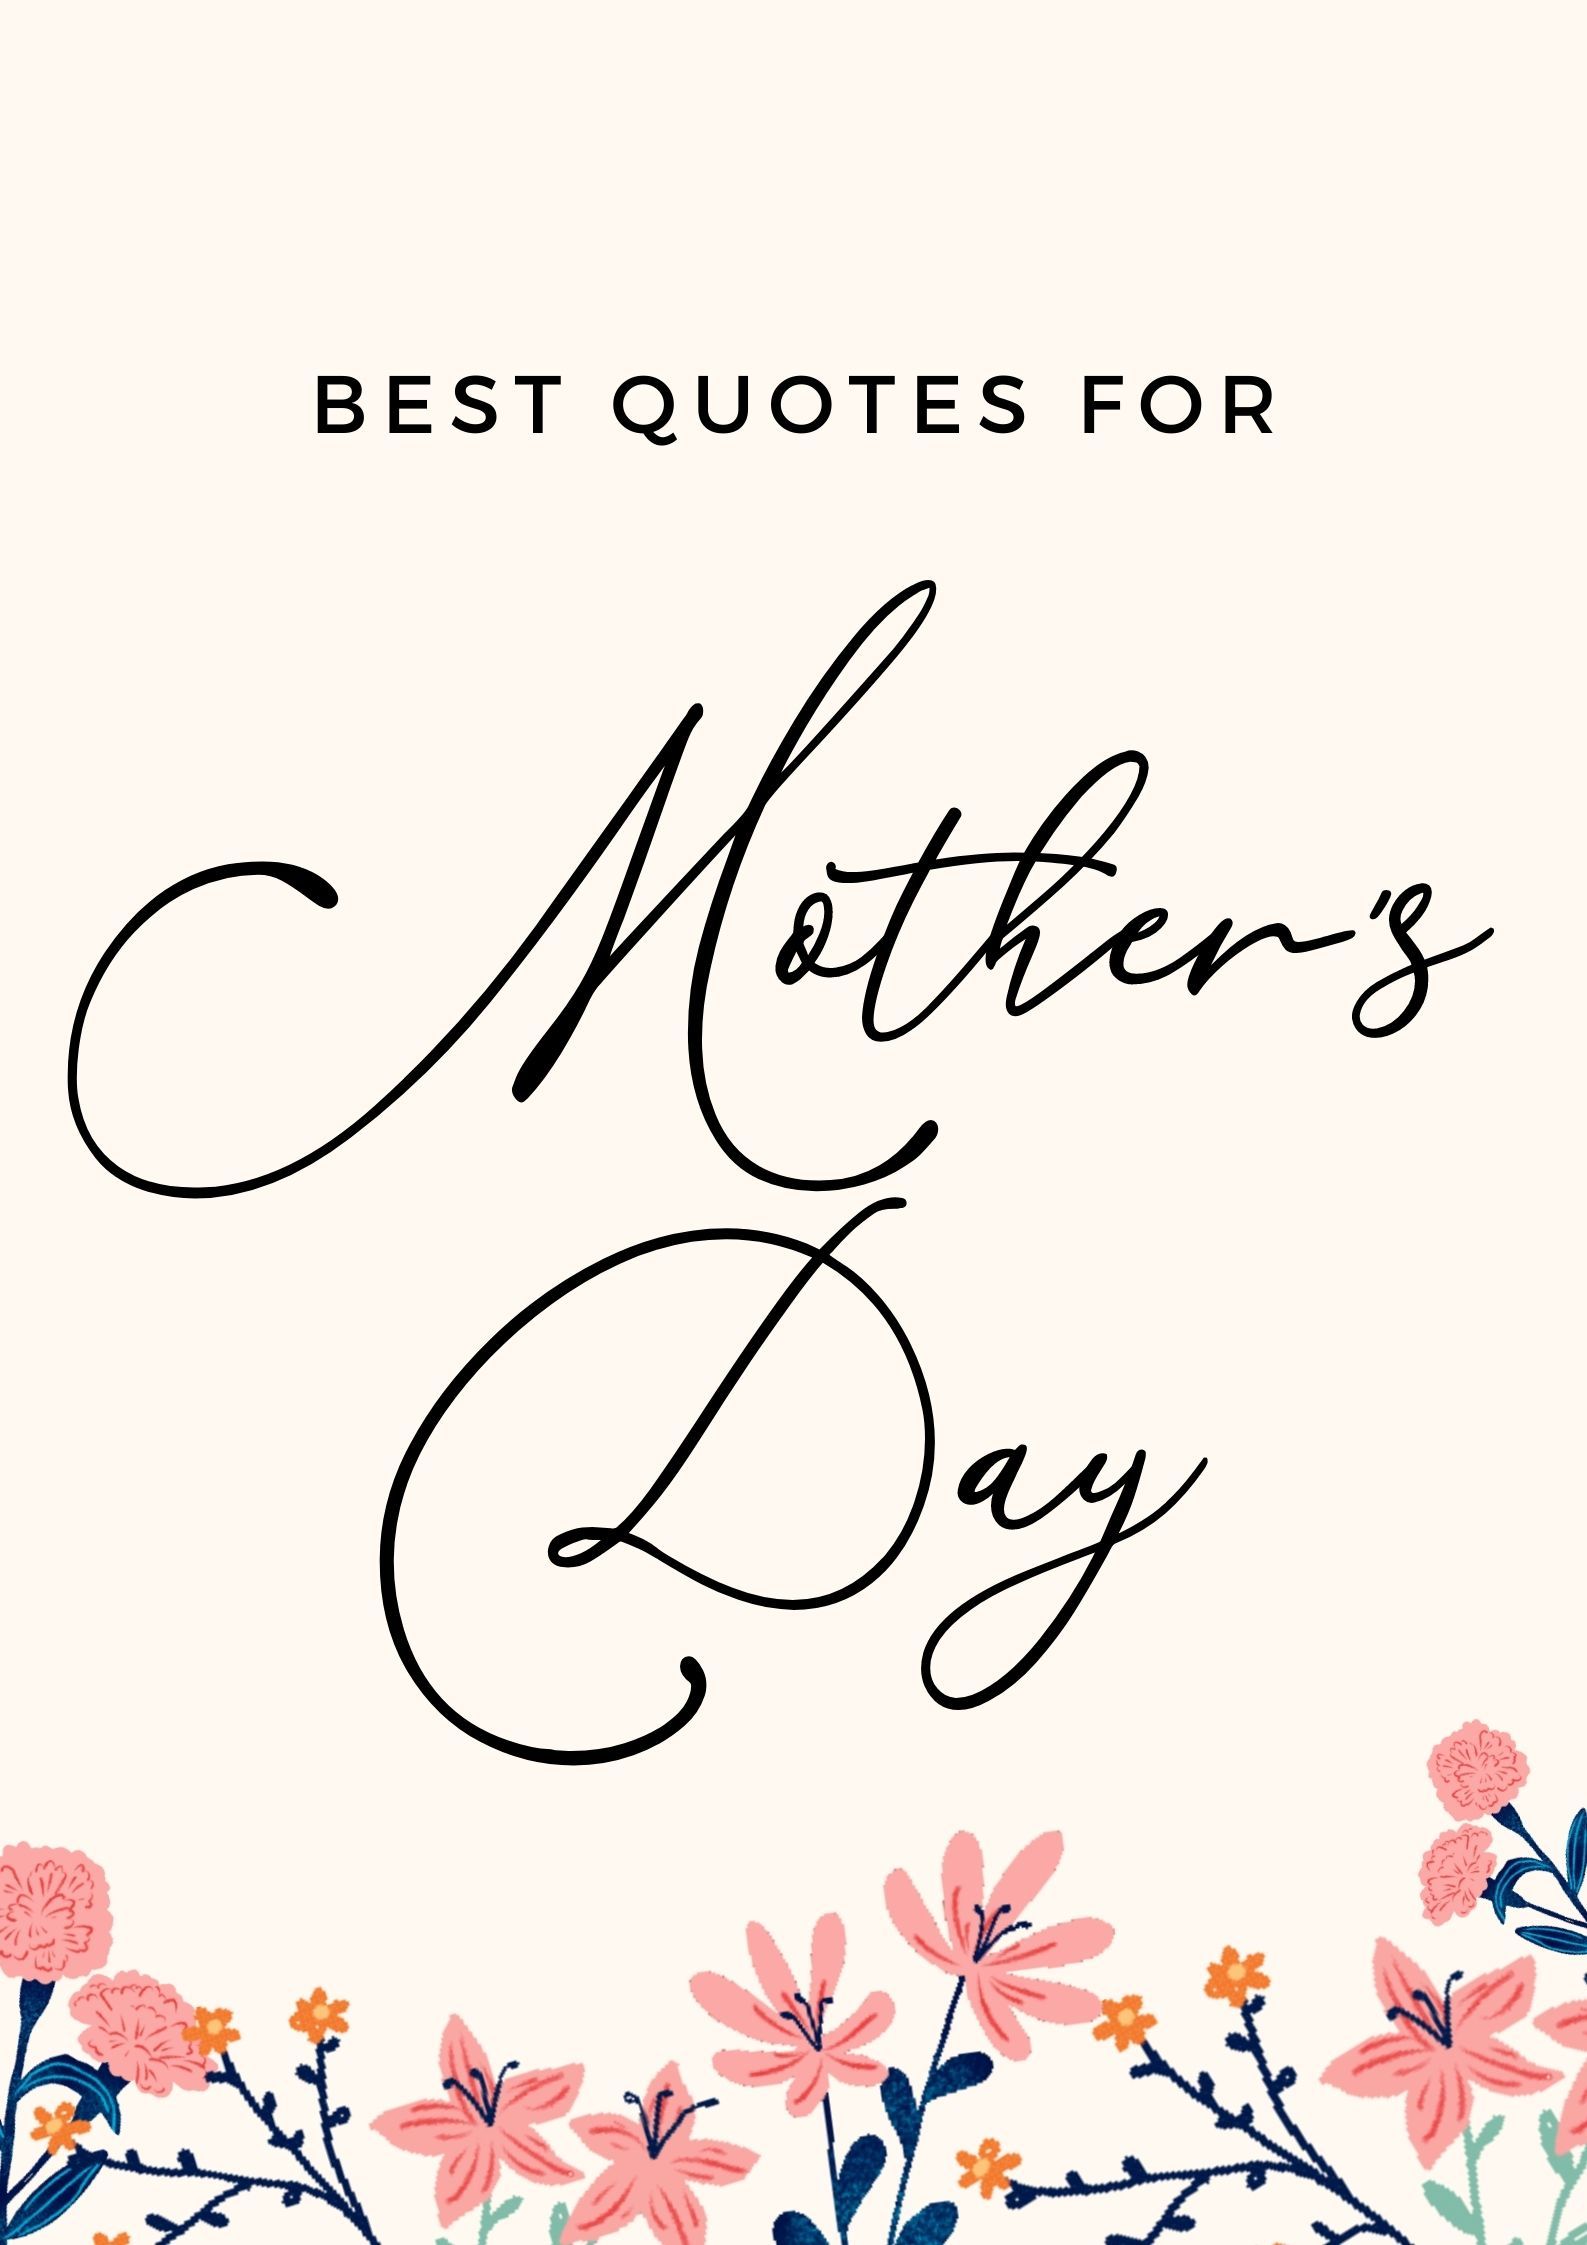 12 Best Mothers Day Quotes That Let Mom Know She’s